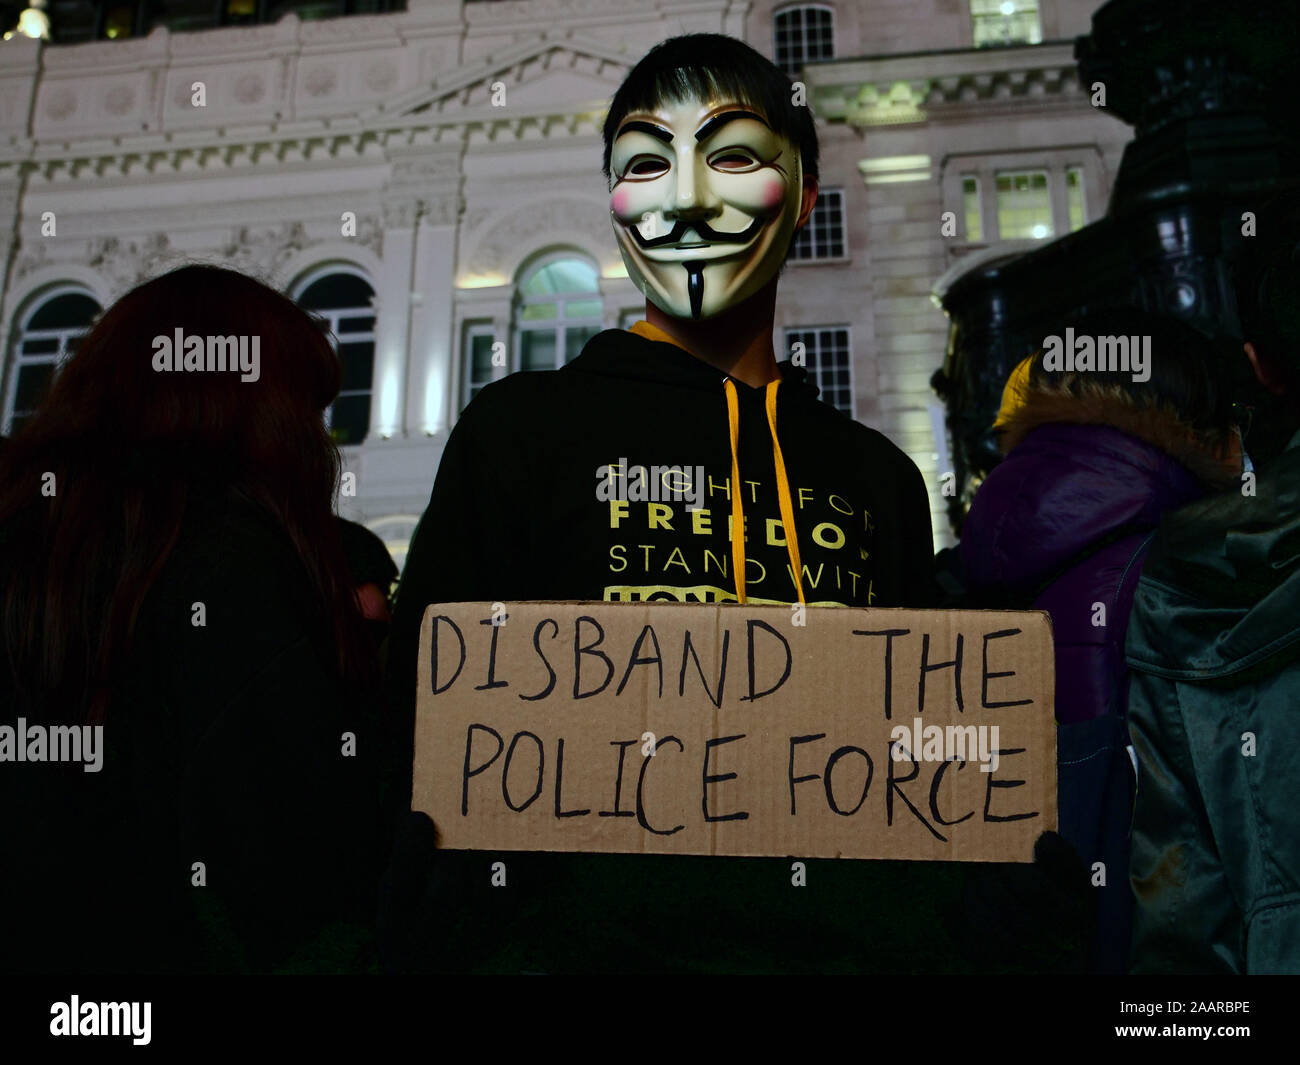 London, UK. 23rd November. Supporters of the protests in Hong Kong demanding democracy and freedom seen on a demonstration in the West End of London, UK. Credit: Joe Kuis / Alamy News Stock Photo